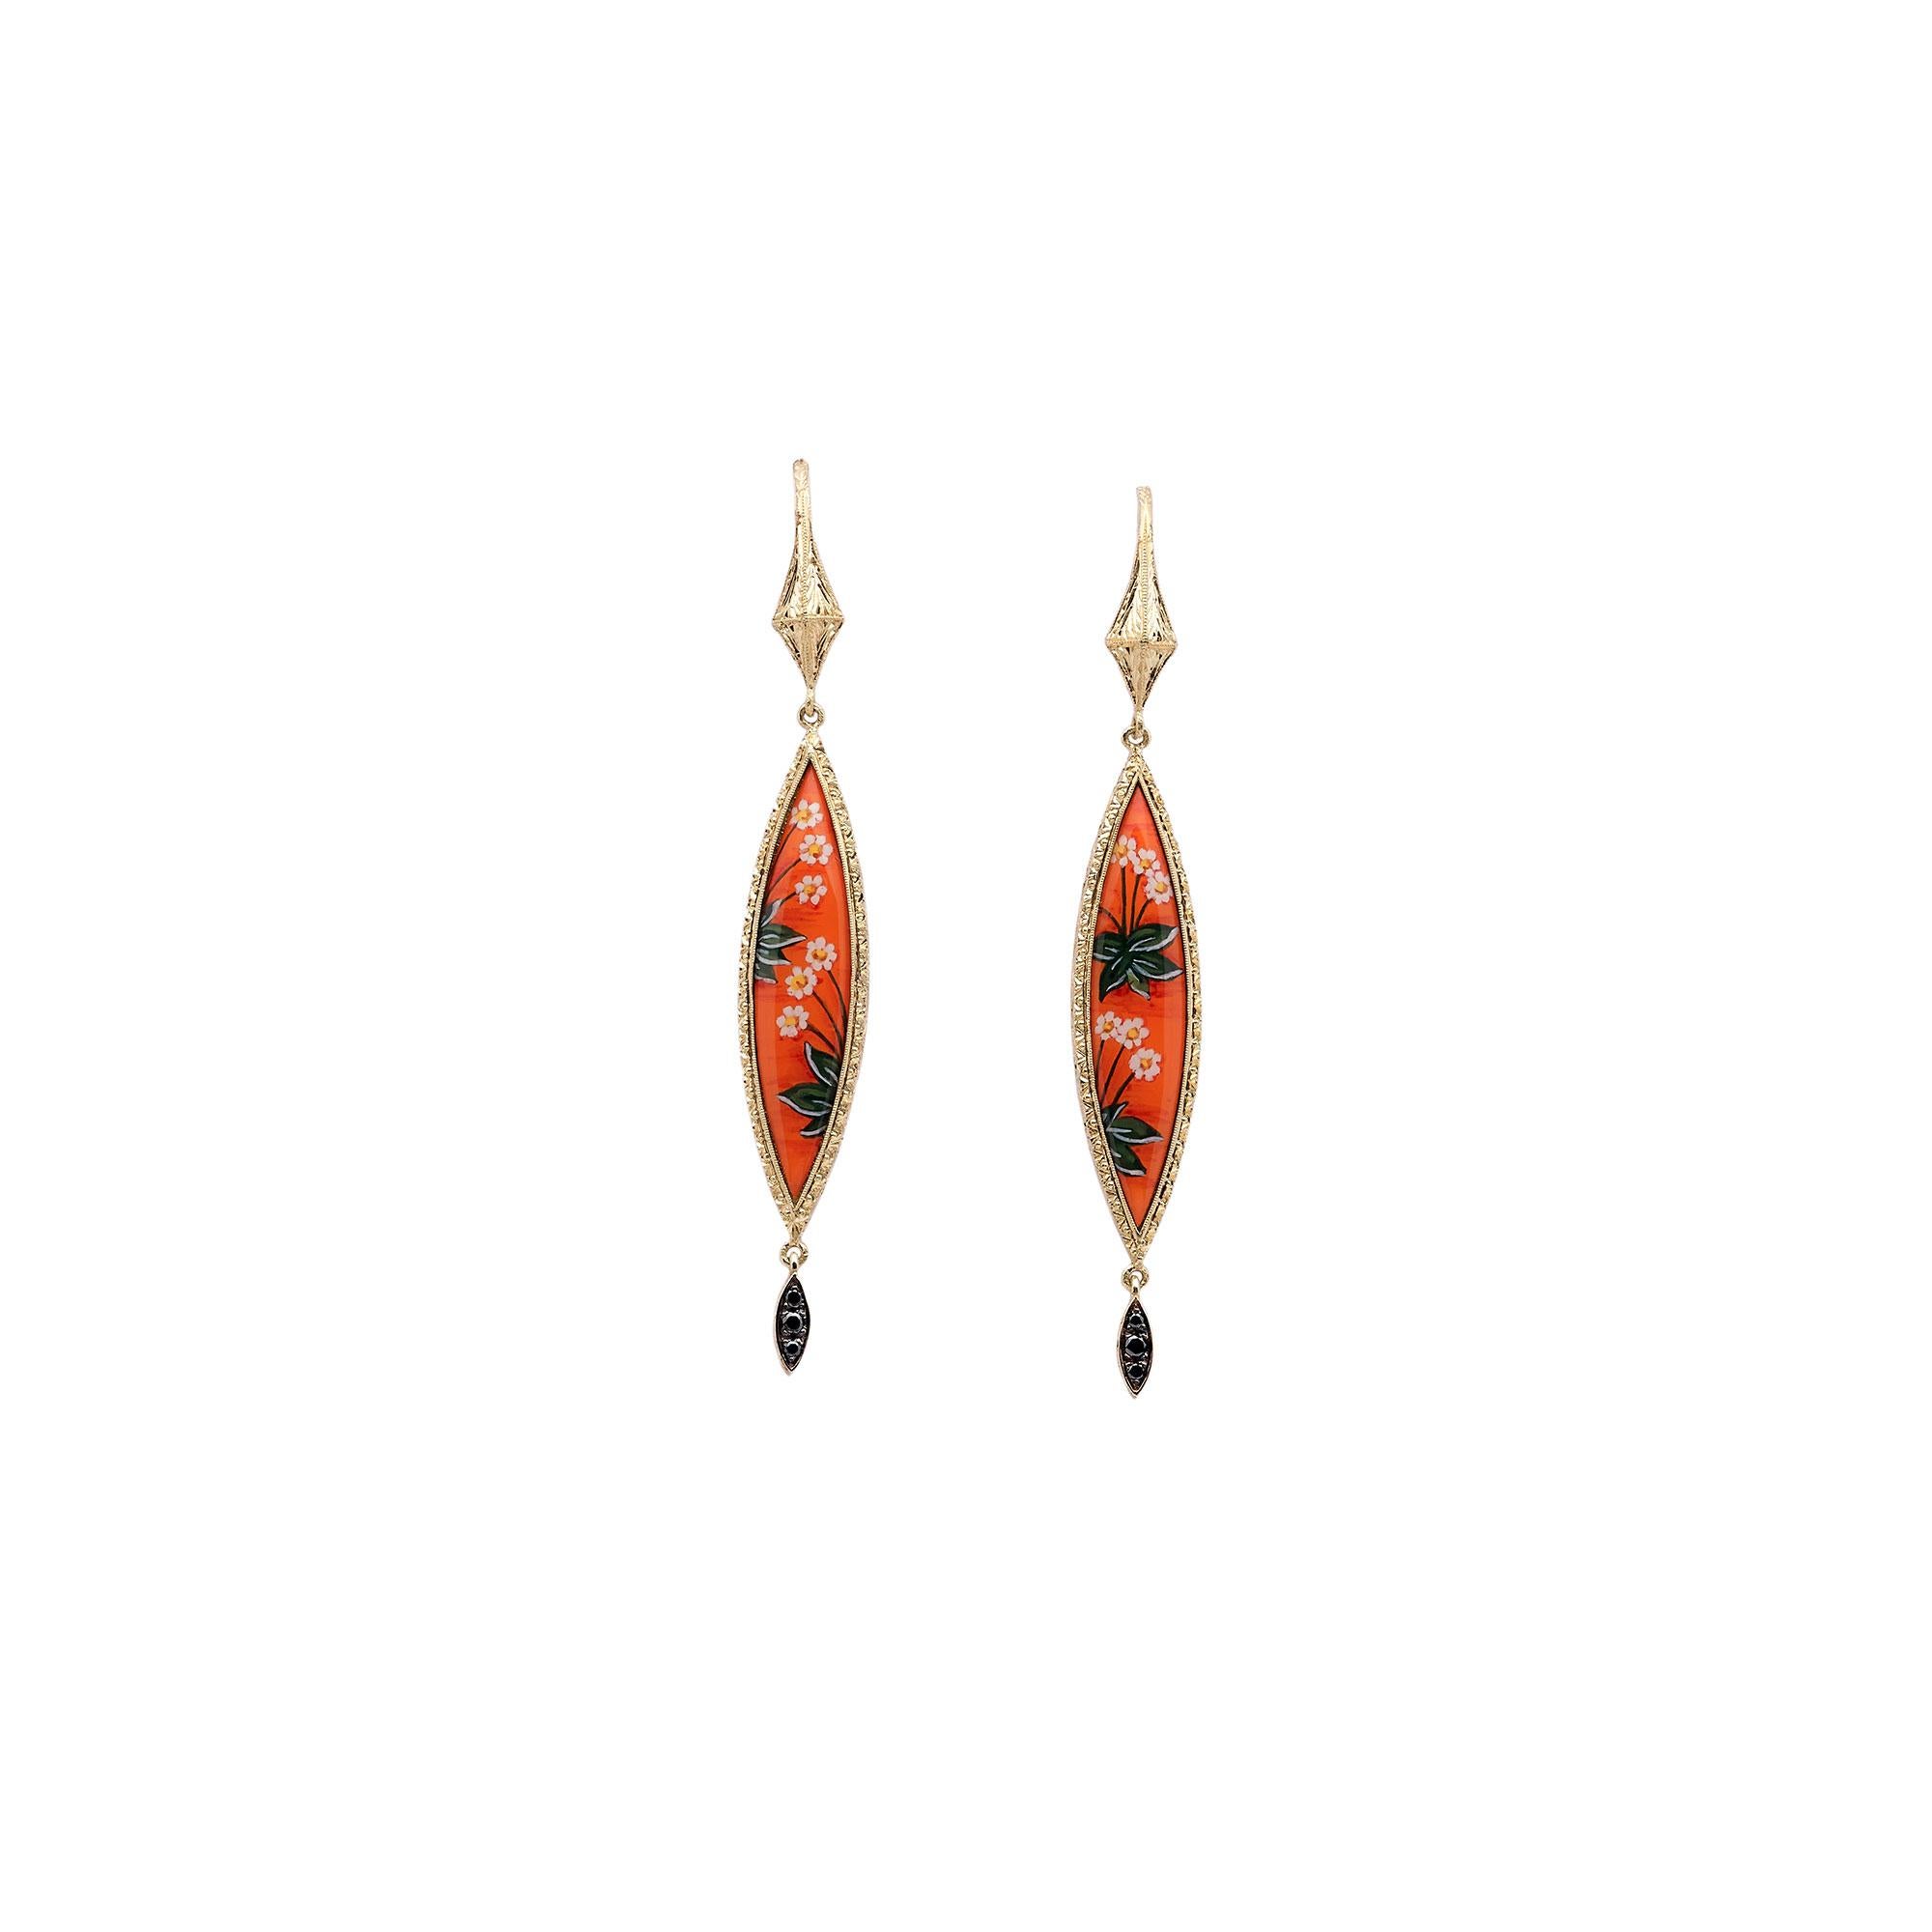 Women's 18kt gold earrings, Diamonds, engraved painted in miniature & enamelled by hands For Sale